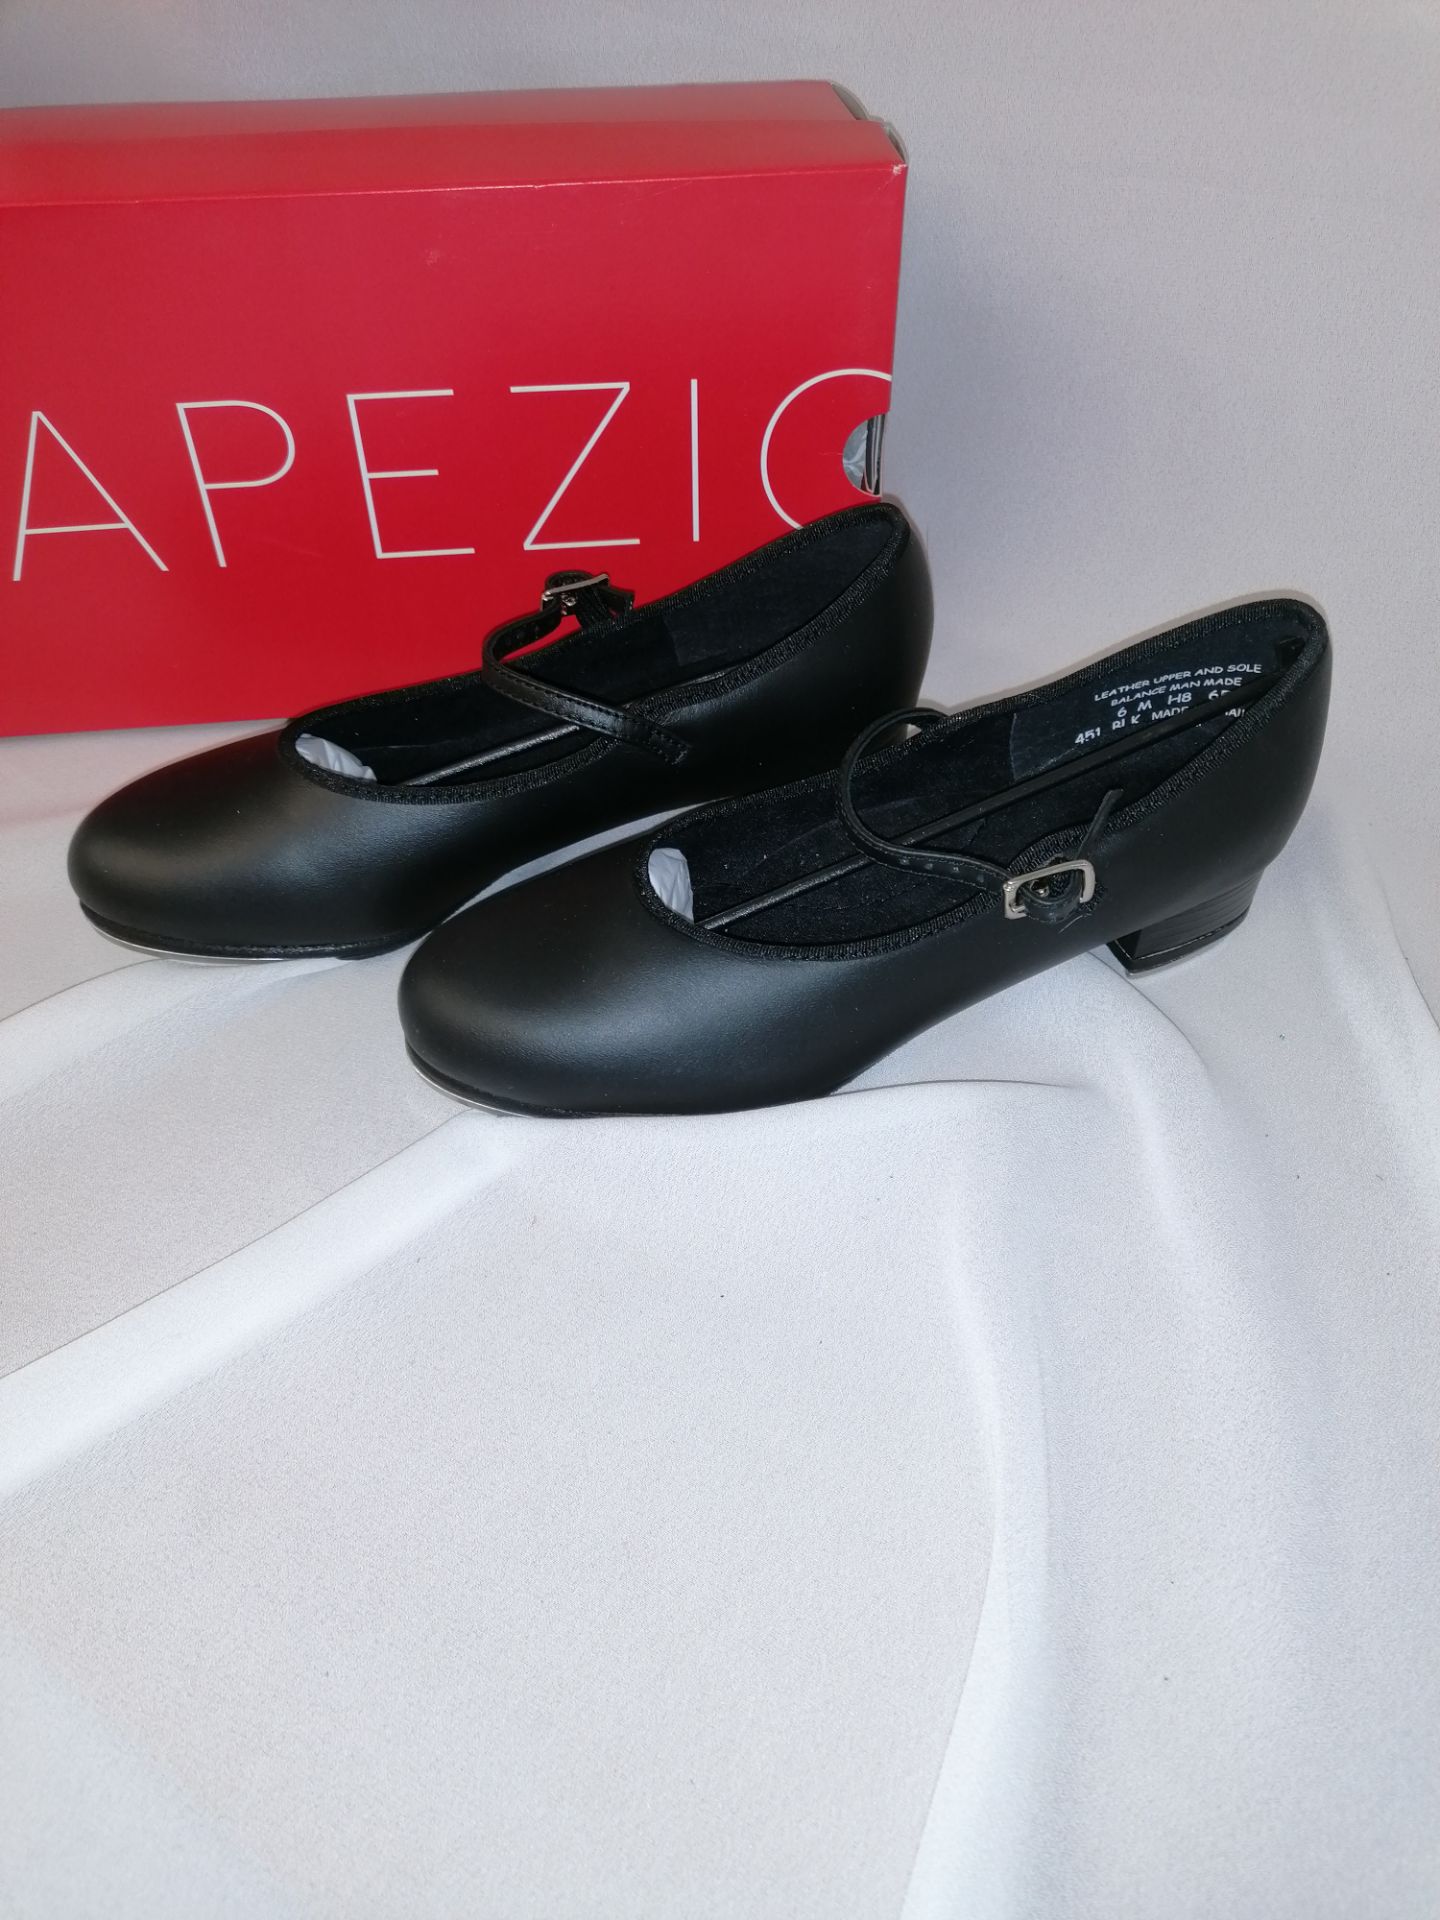 31 x Black character tap shoes model 451 aizes 6-10M - Image 5 of 6